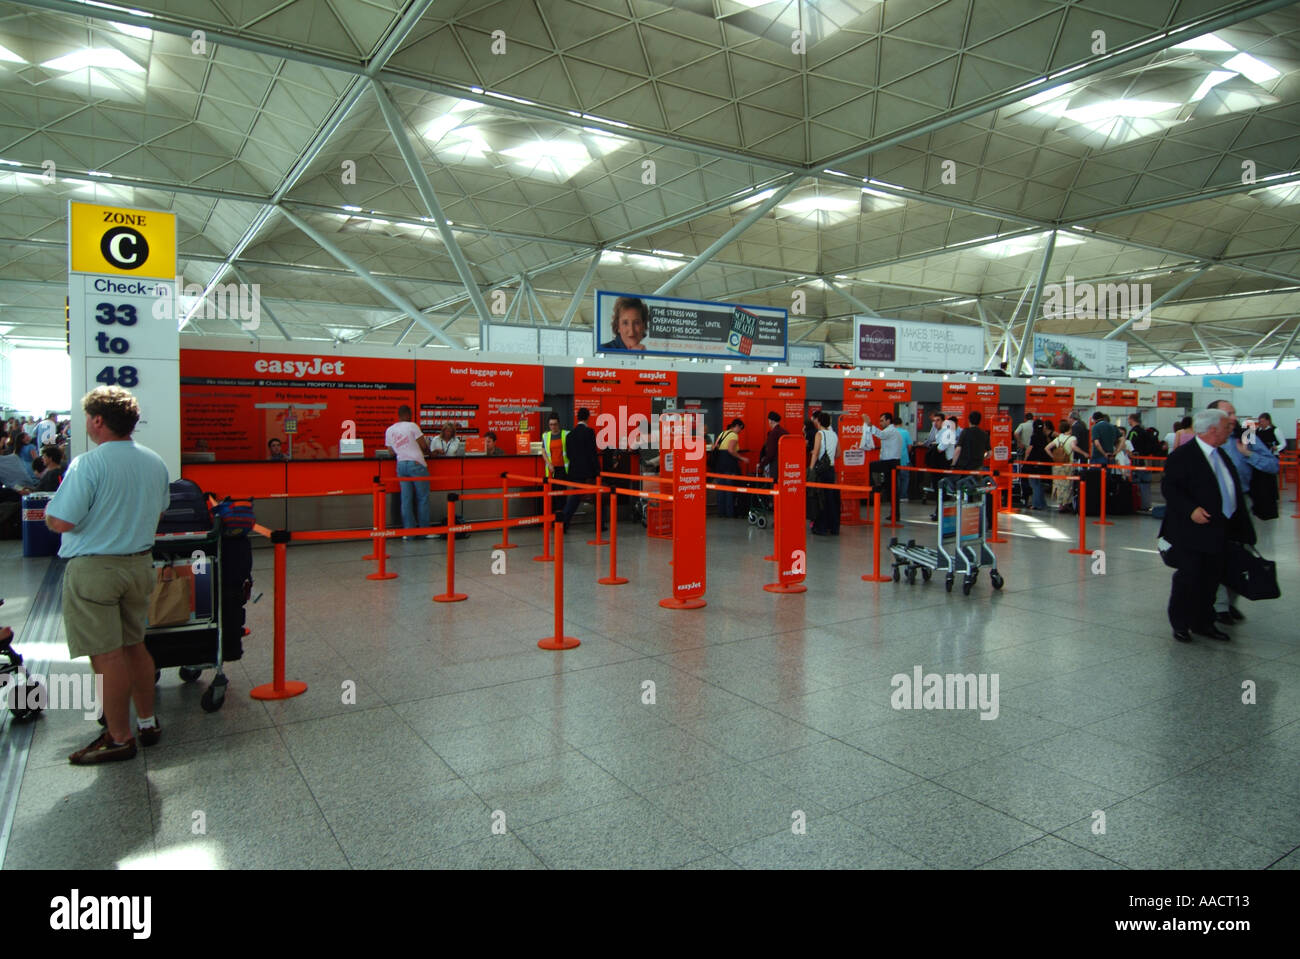 London Stansted Airport main terminal building interior and easyjet check in desks Stock Photo